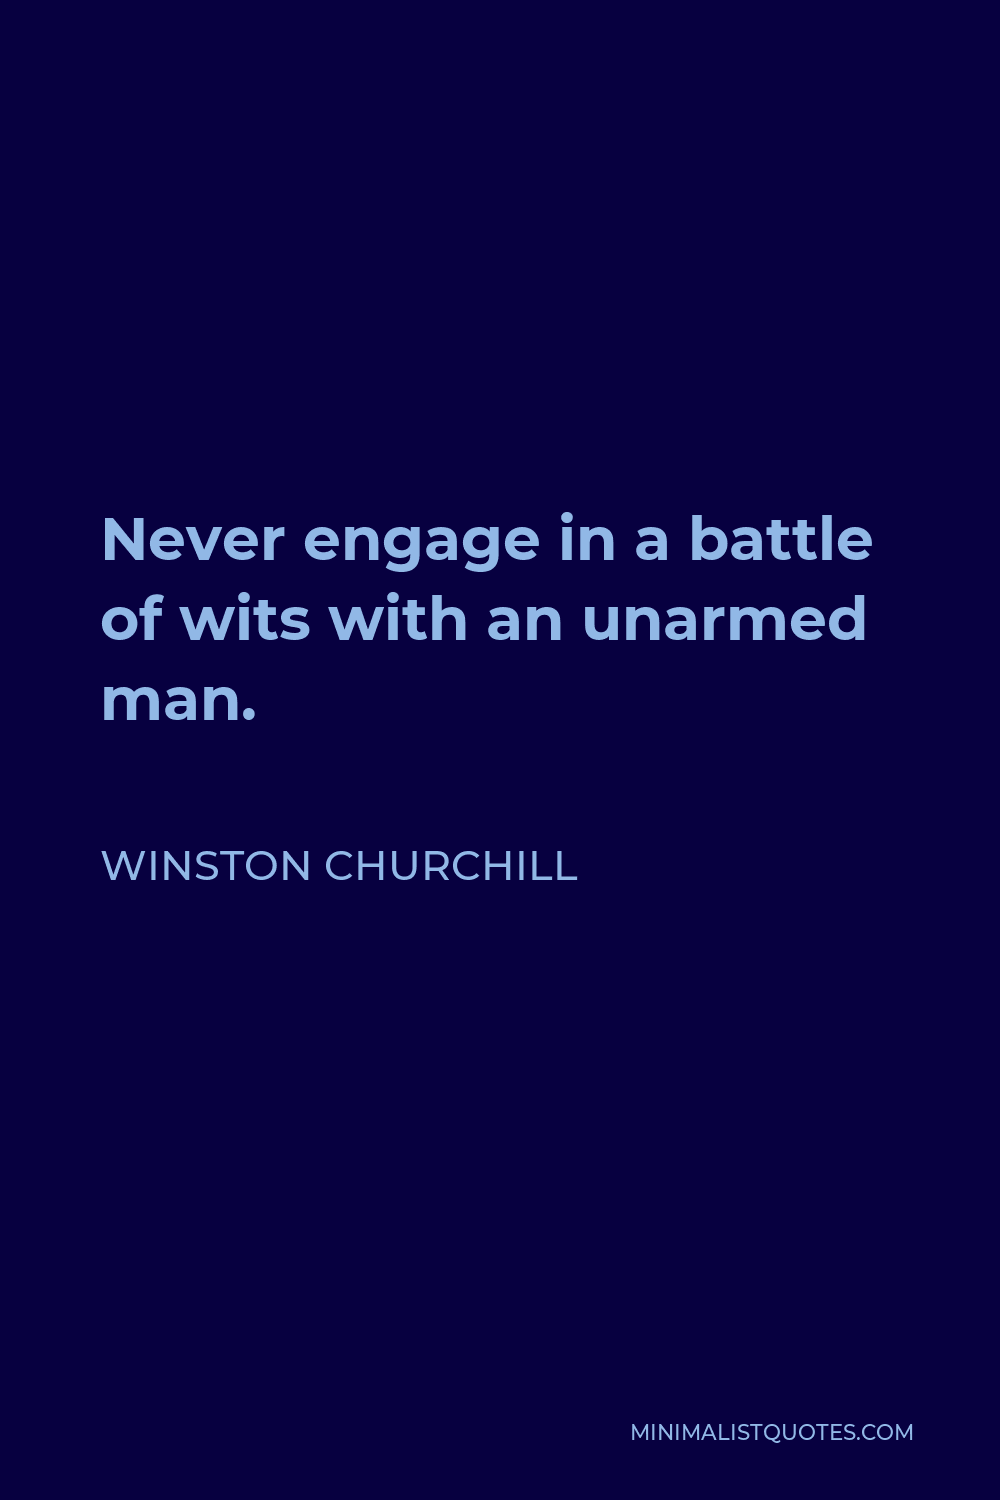 Winston Churchill Quote - Never engage in a battle of wits with an unarmed man.